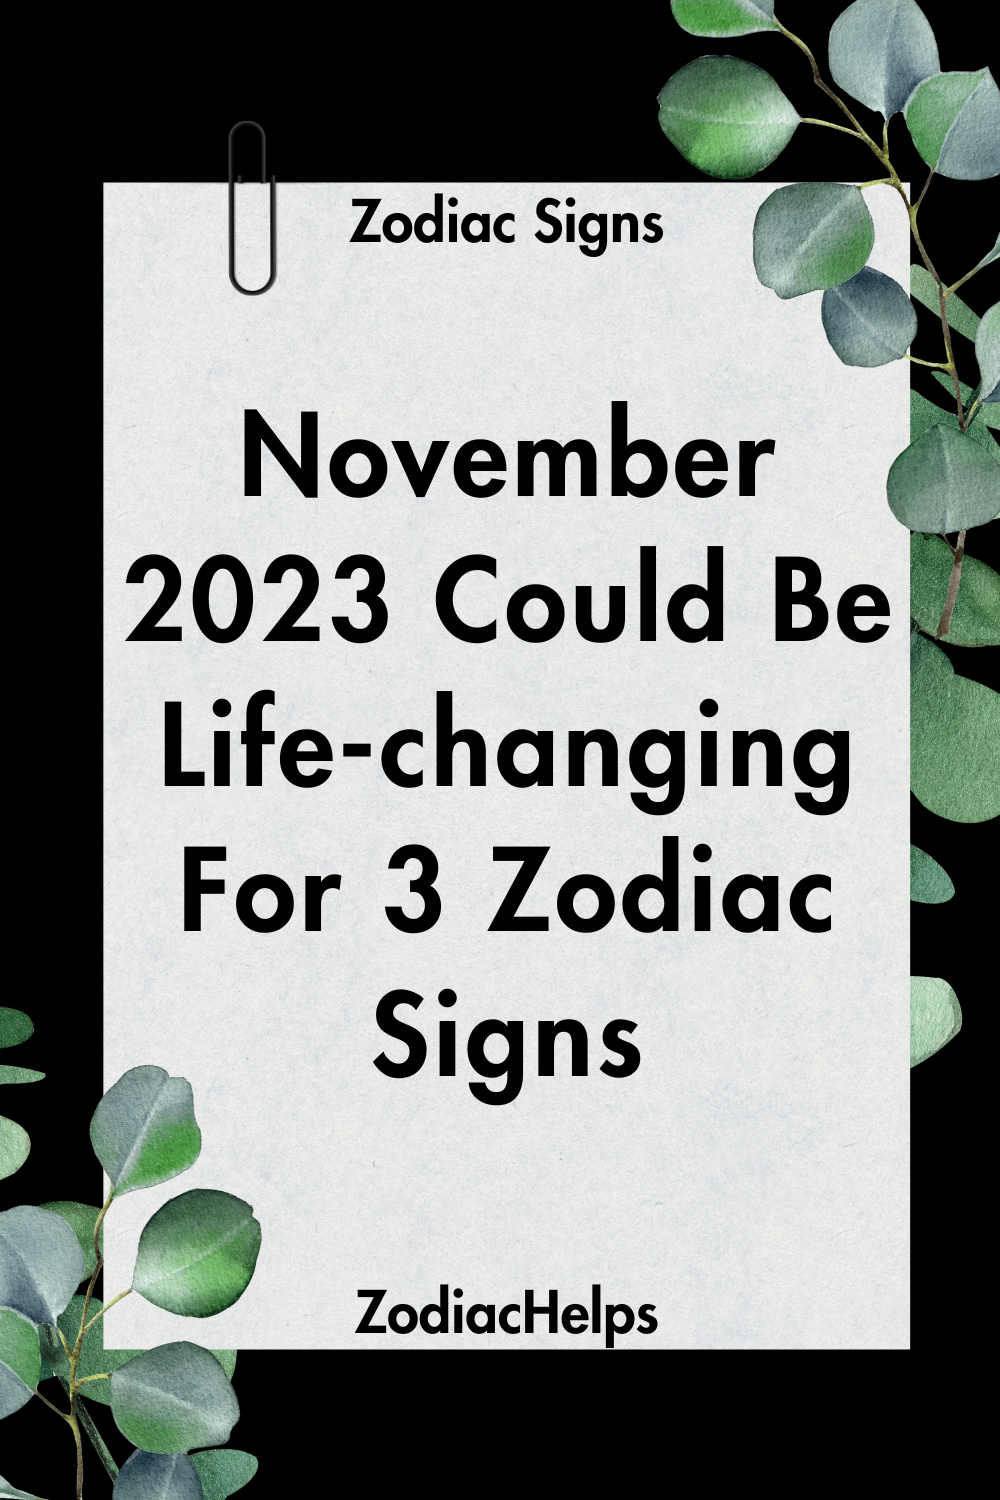 November 2023 Could Be Life-changing For 3 Zodiac Signs